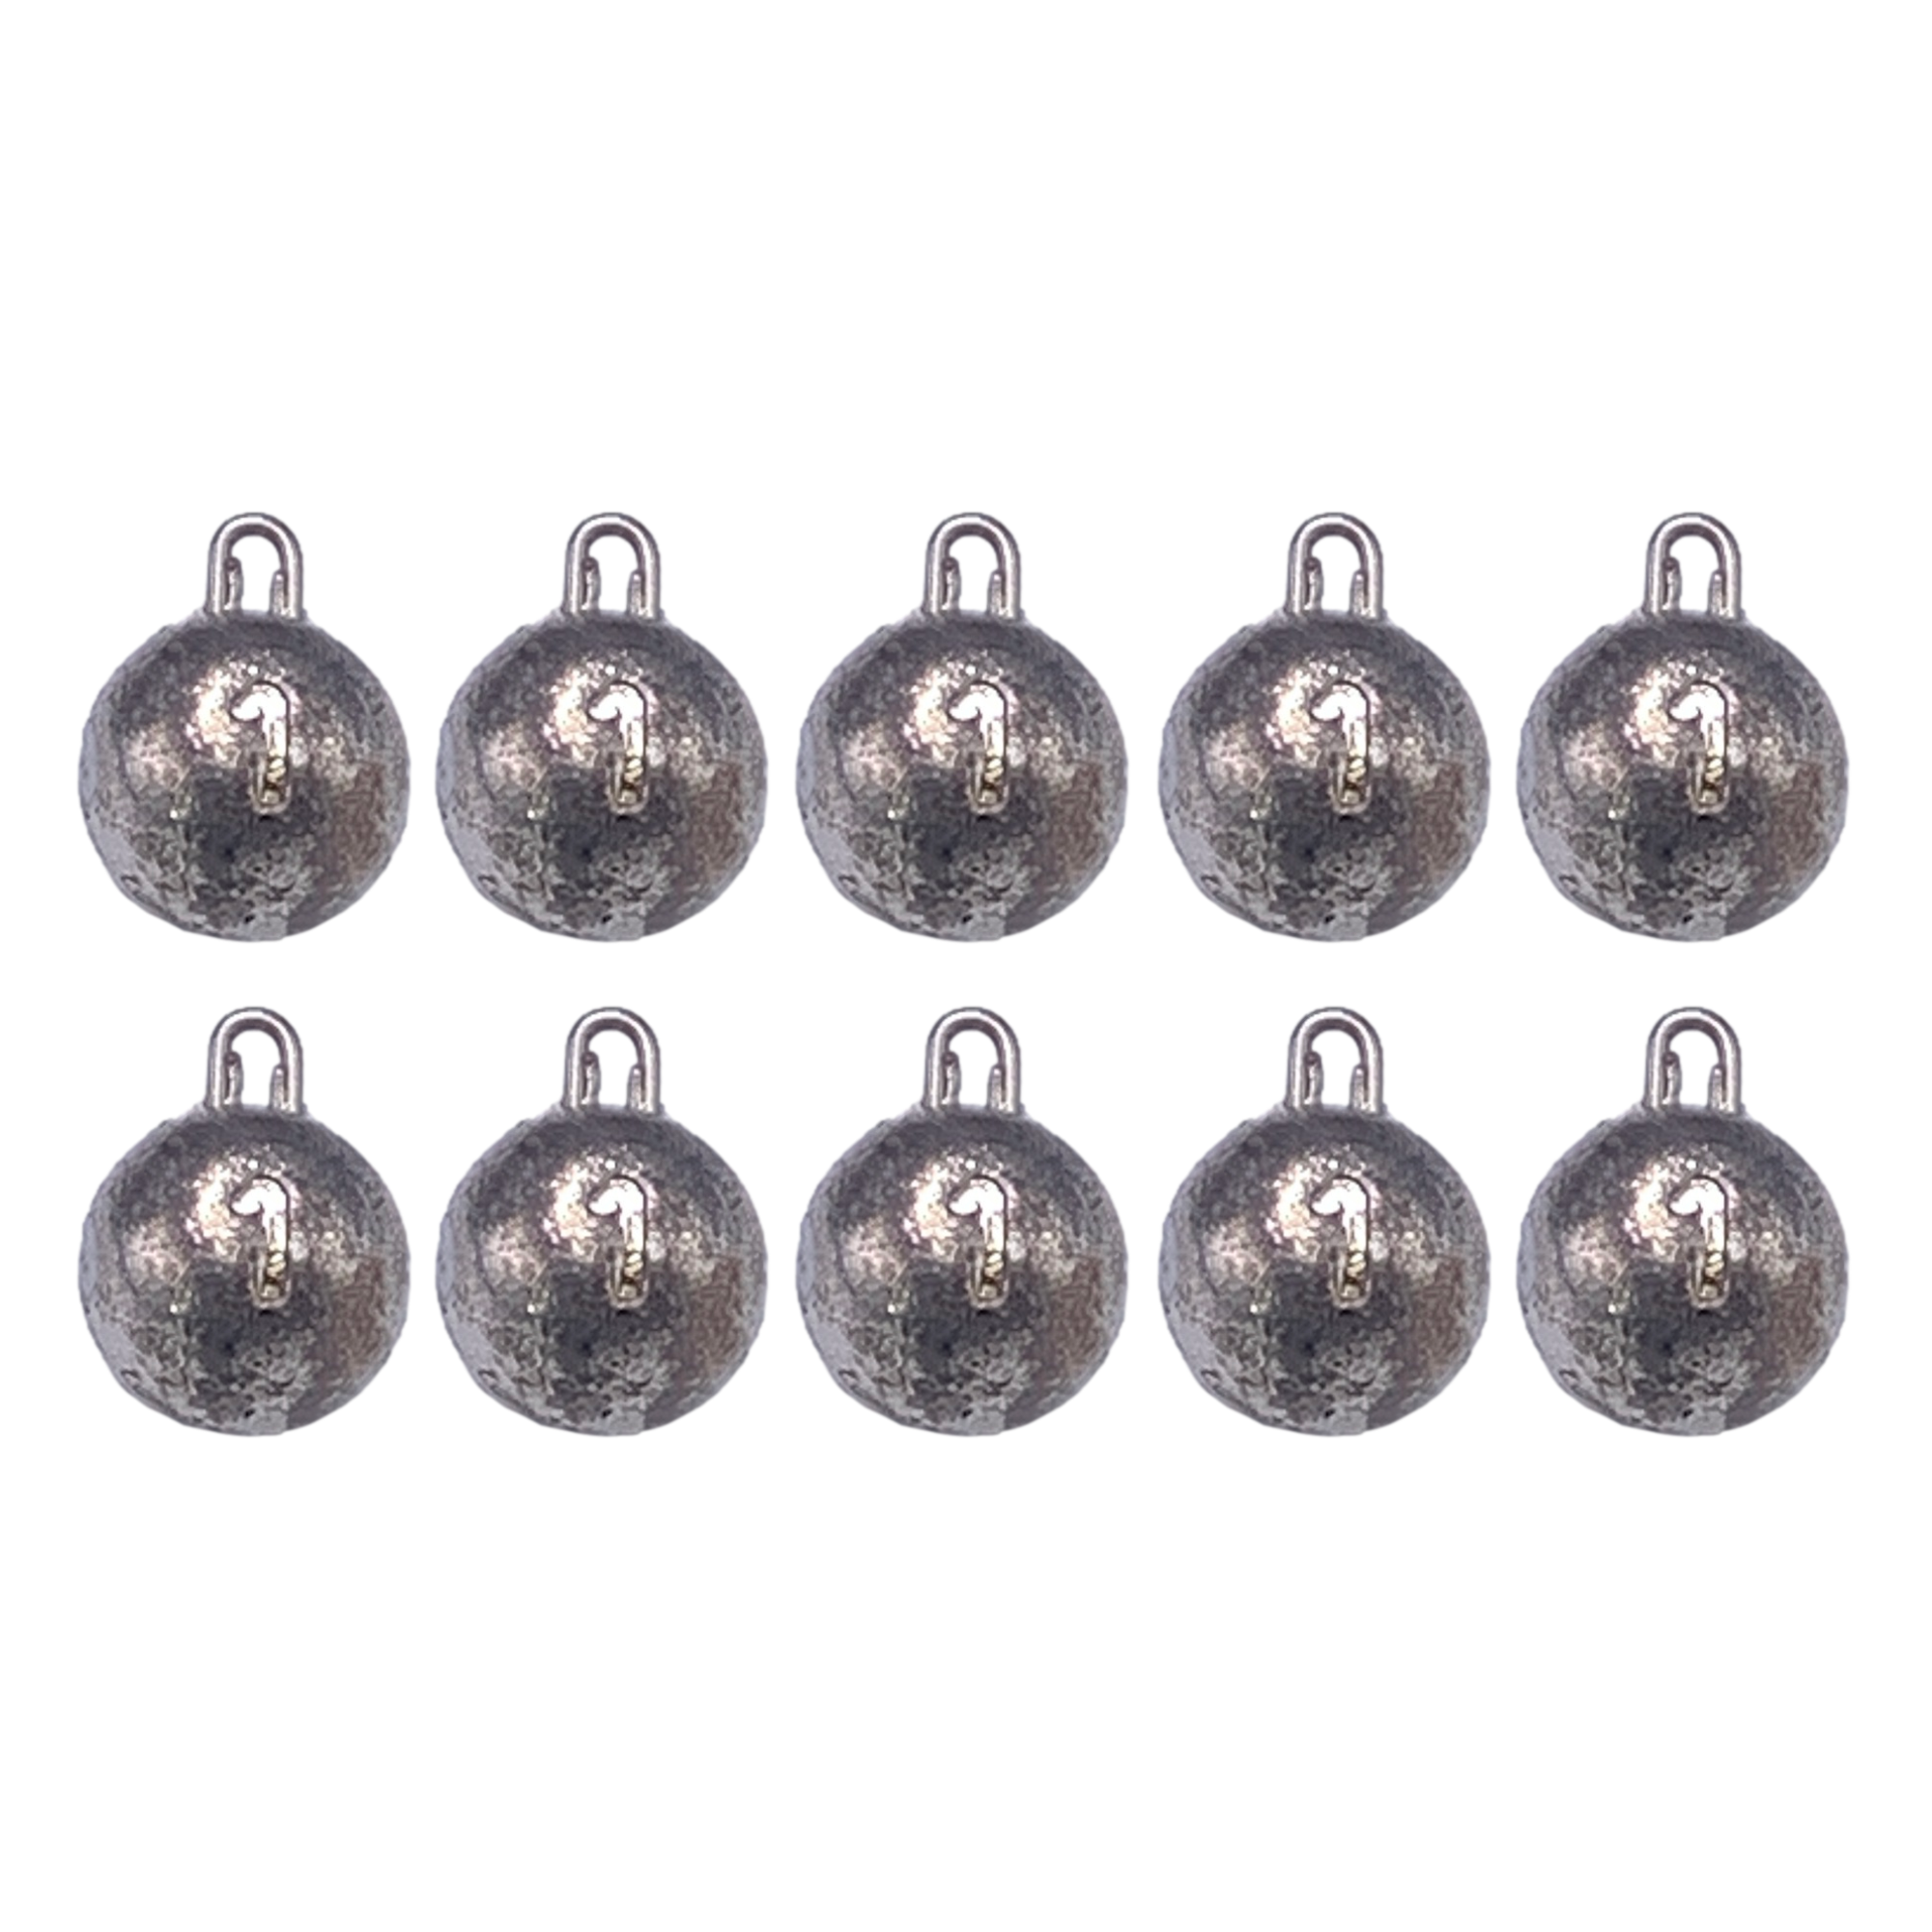 SEA Fishing Weights Cannonball Style Pack of 10 - 1oz 2oz 3oz 4oz